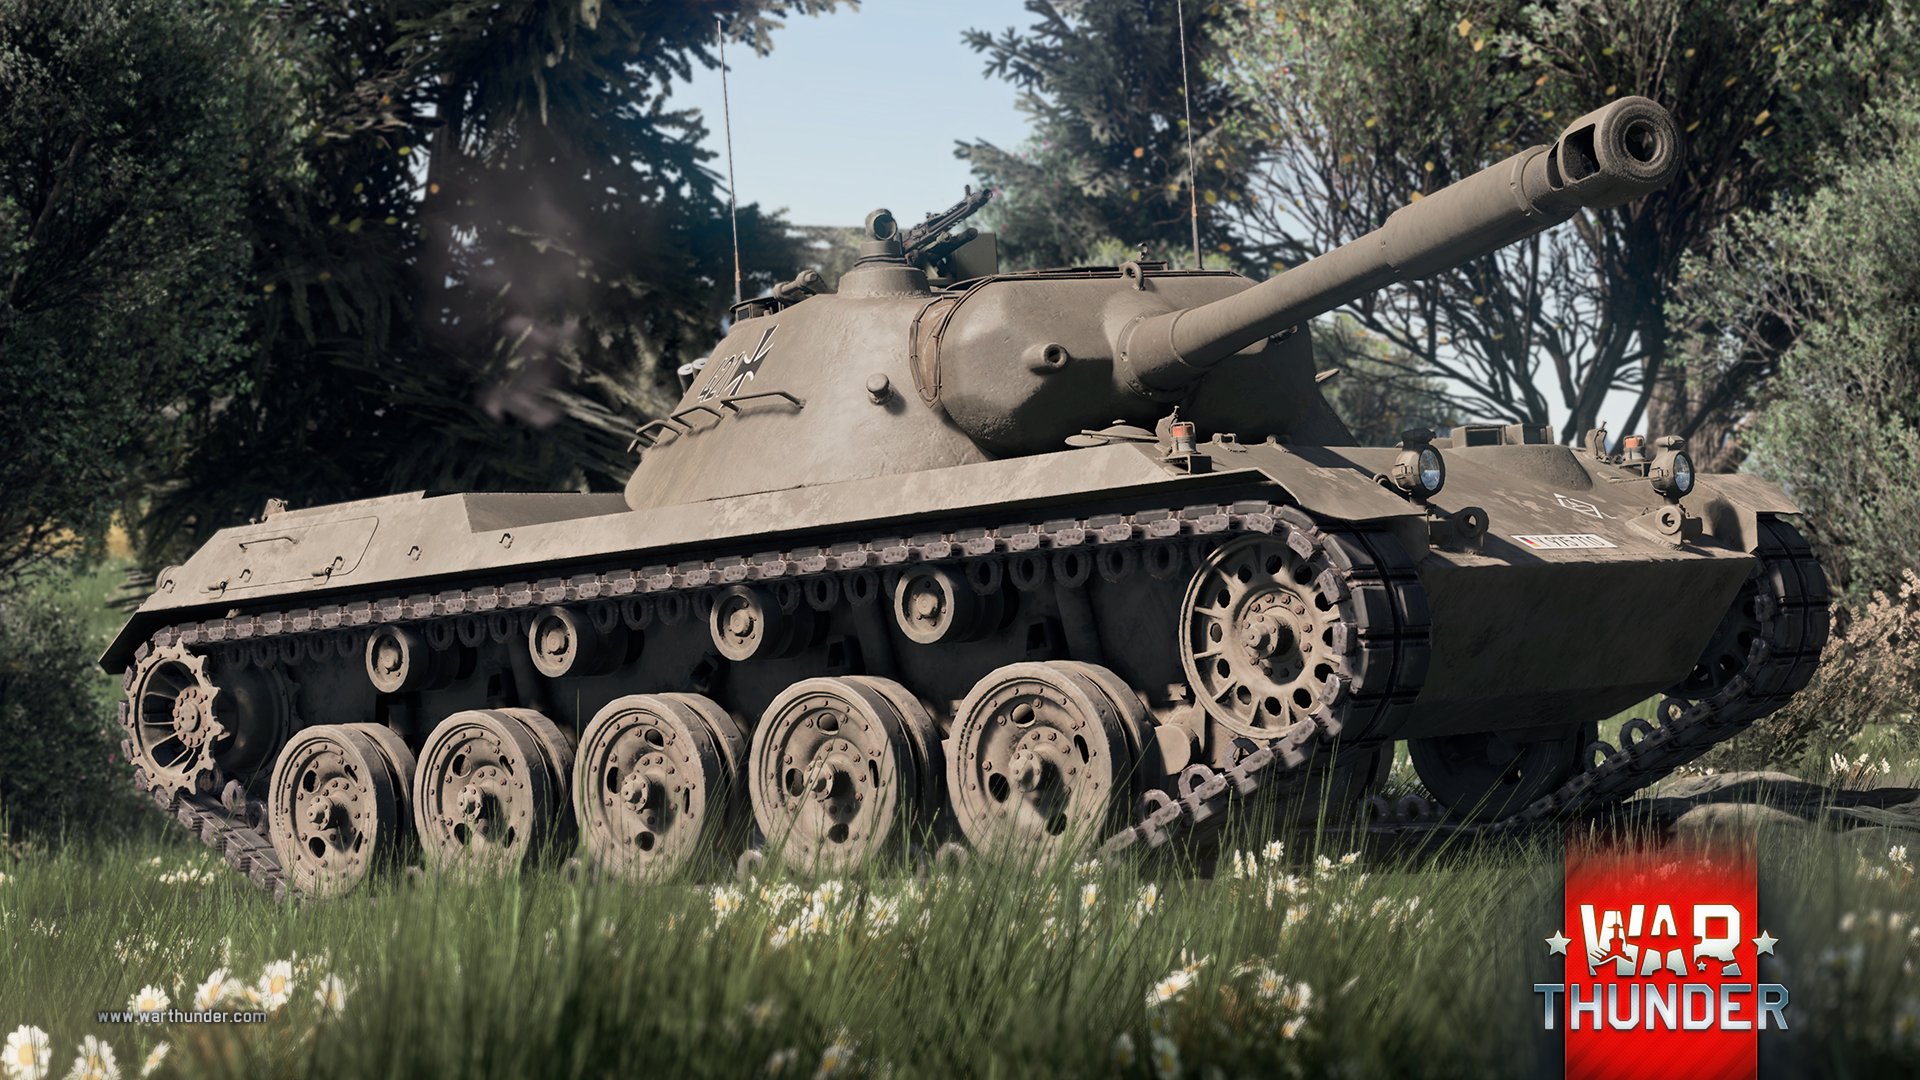 War Thunder on Twitter: "In 1963, 57 years ago, the #Spähpanzer Ru 251  first appeared. The Ru 251 was created to replace the outdated M41s still  in use with the Bundeswehr. Despite